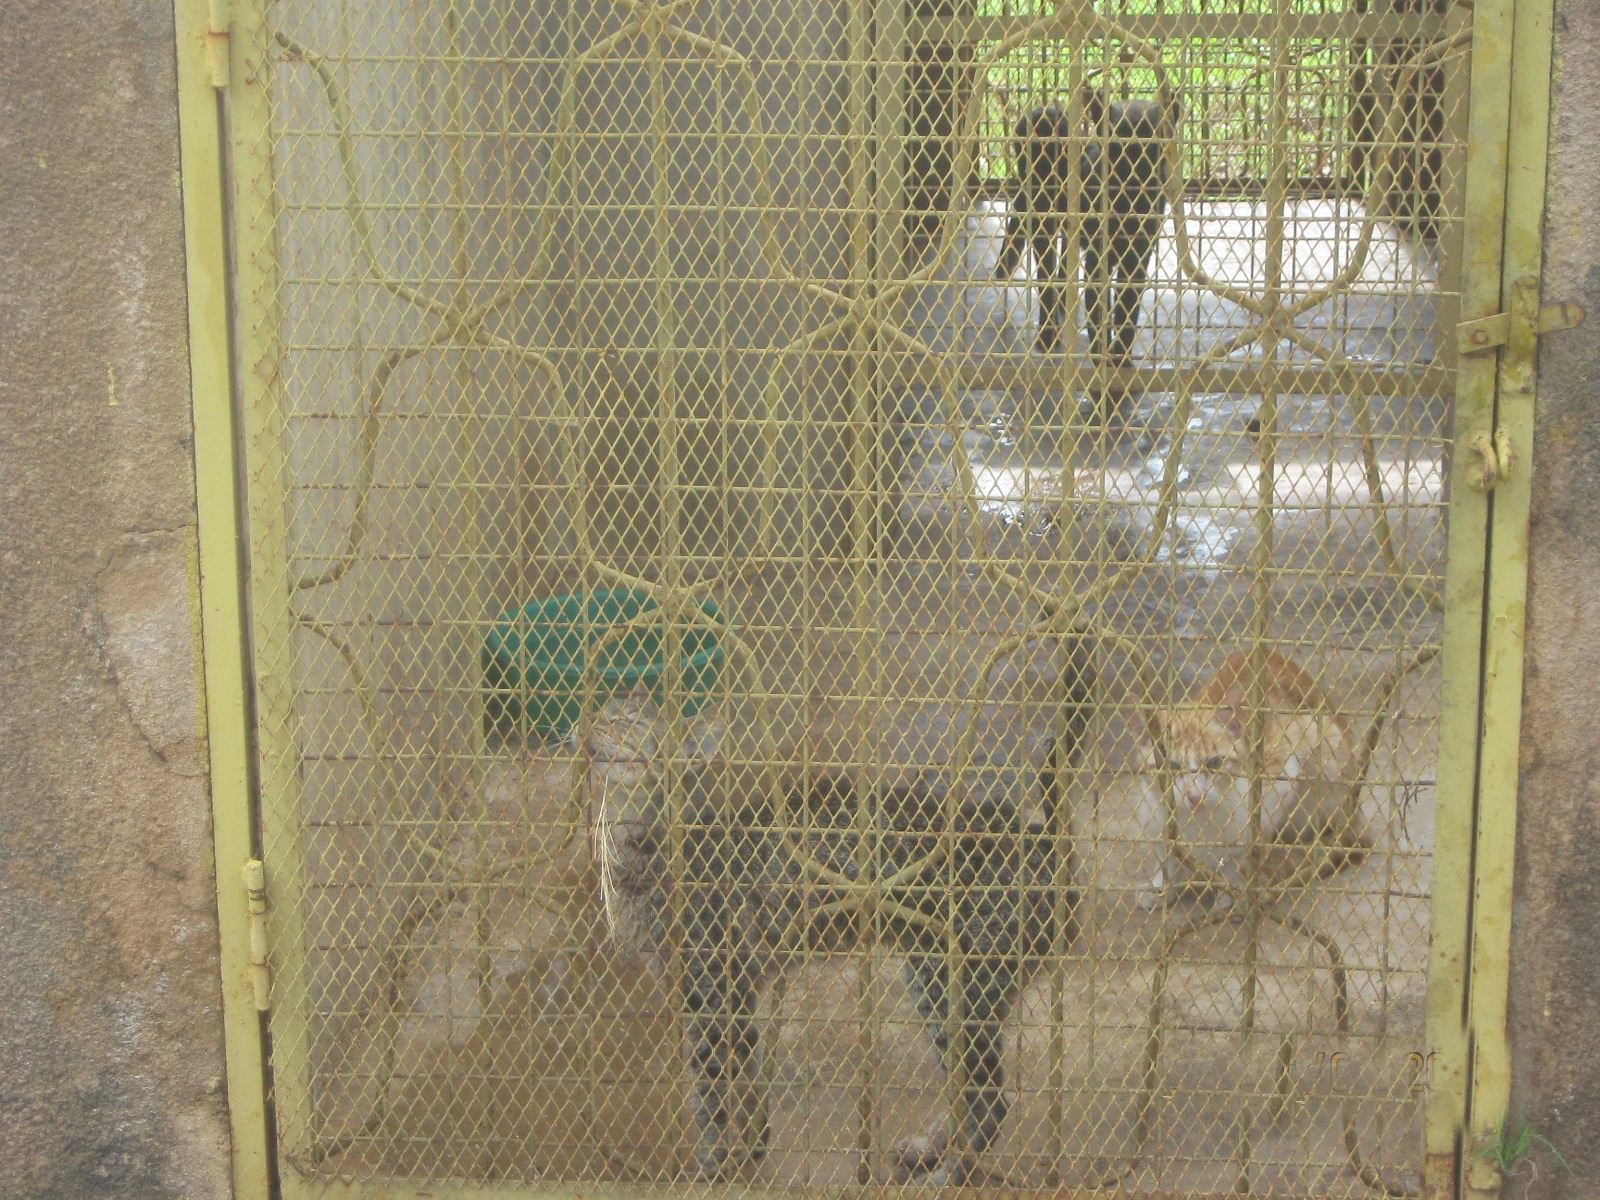 cats were kept in cannels with adequate food and water